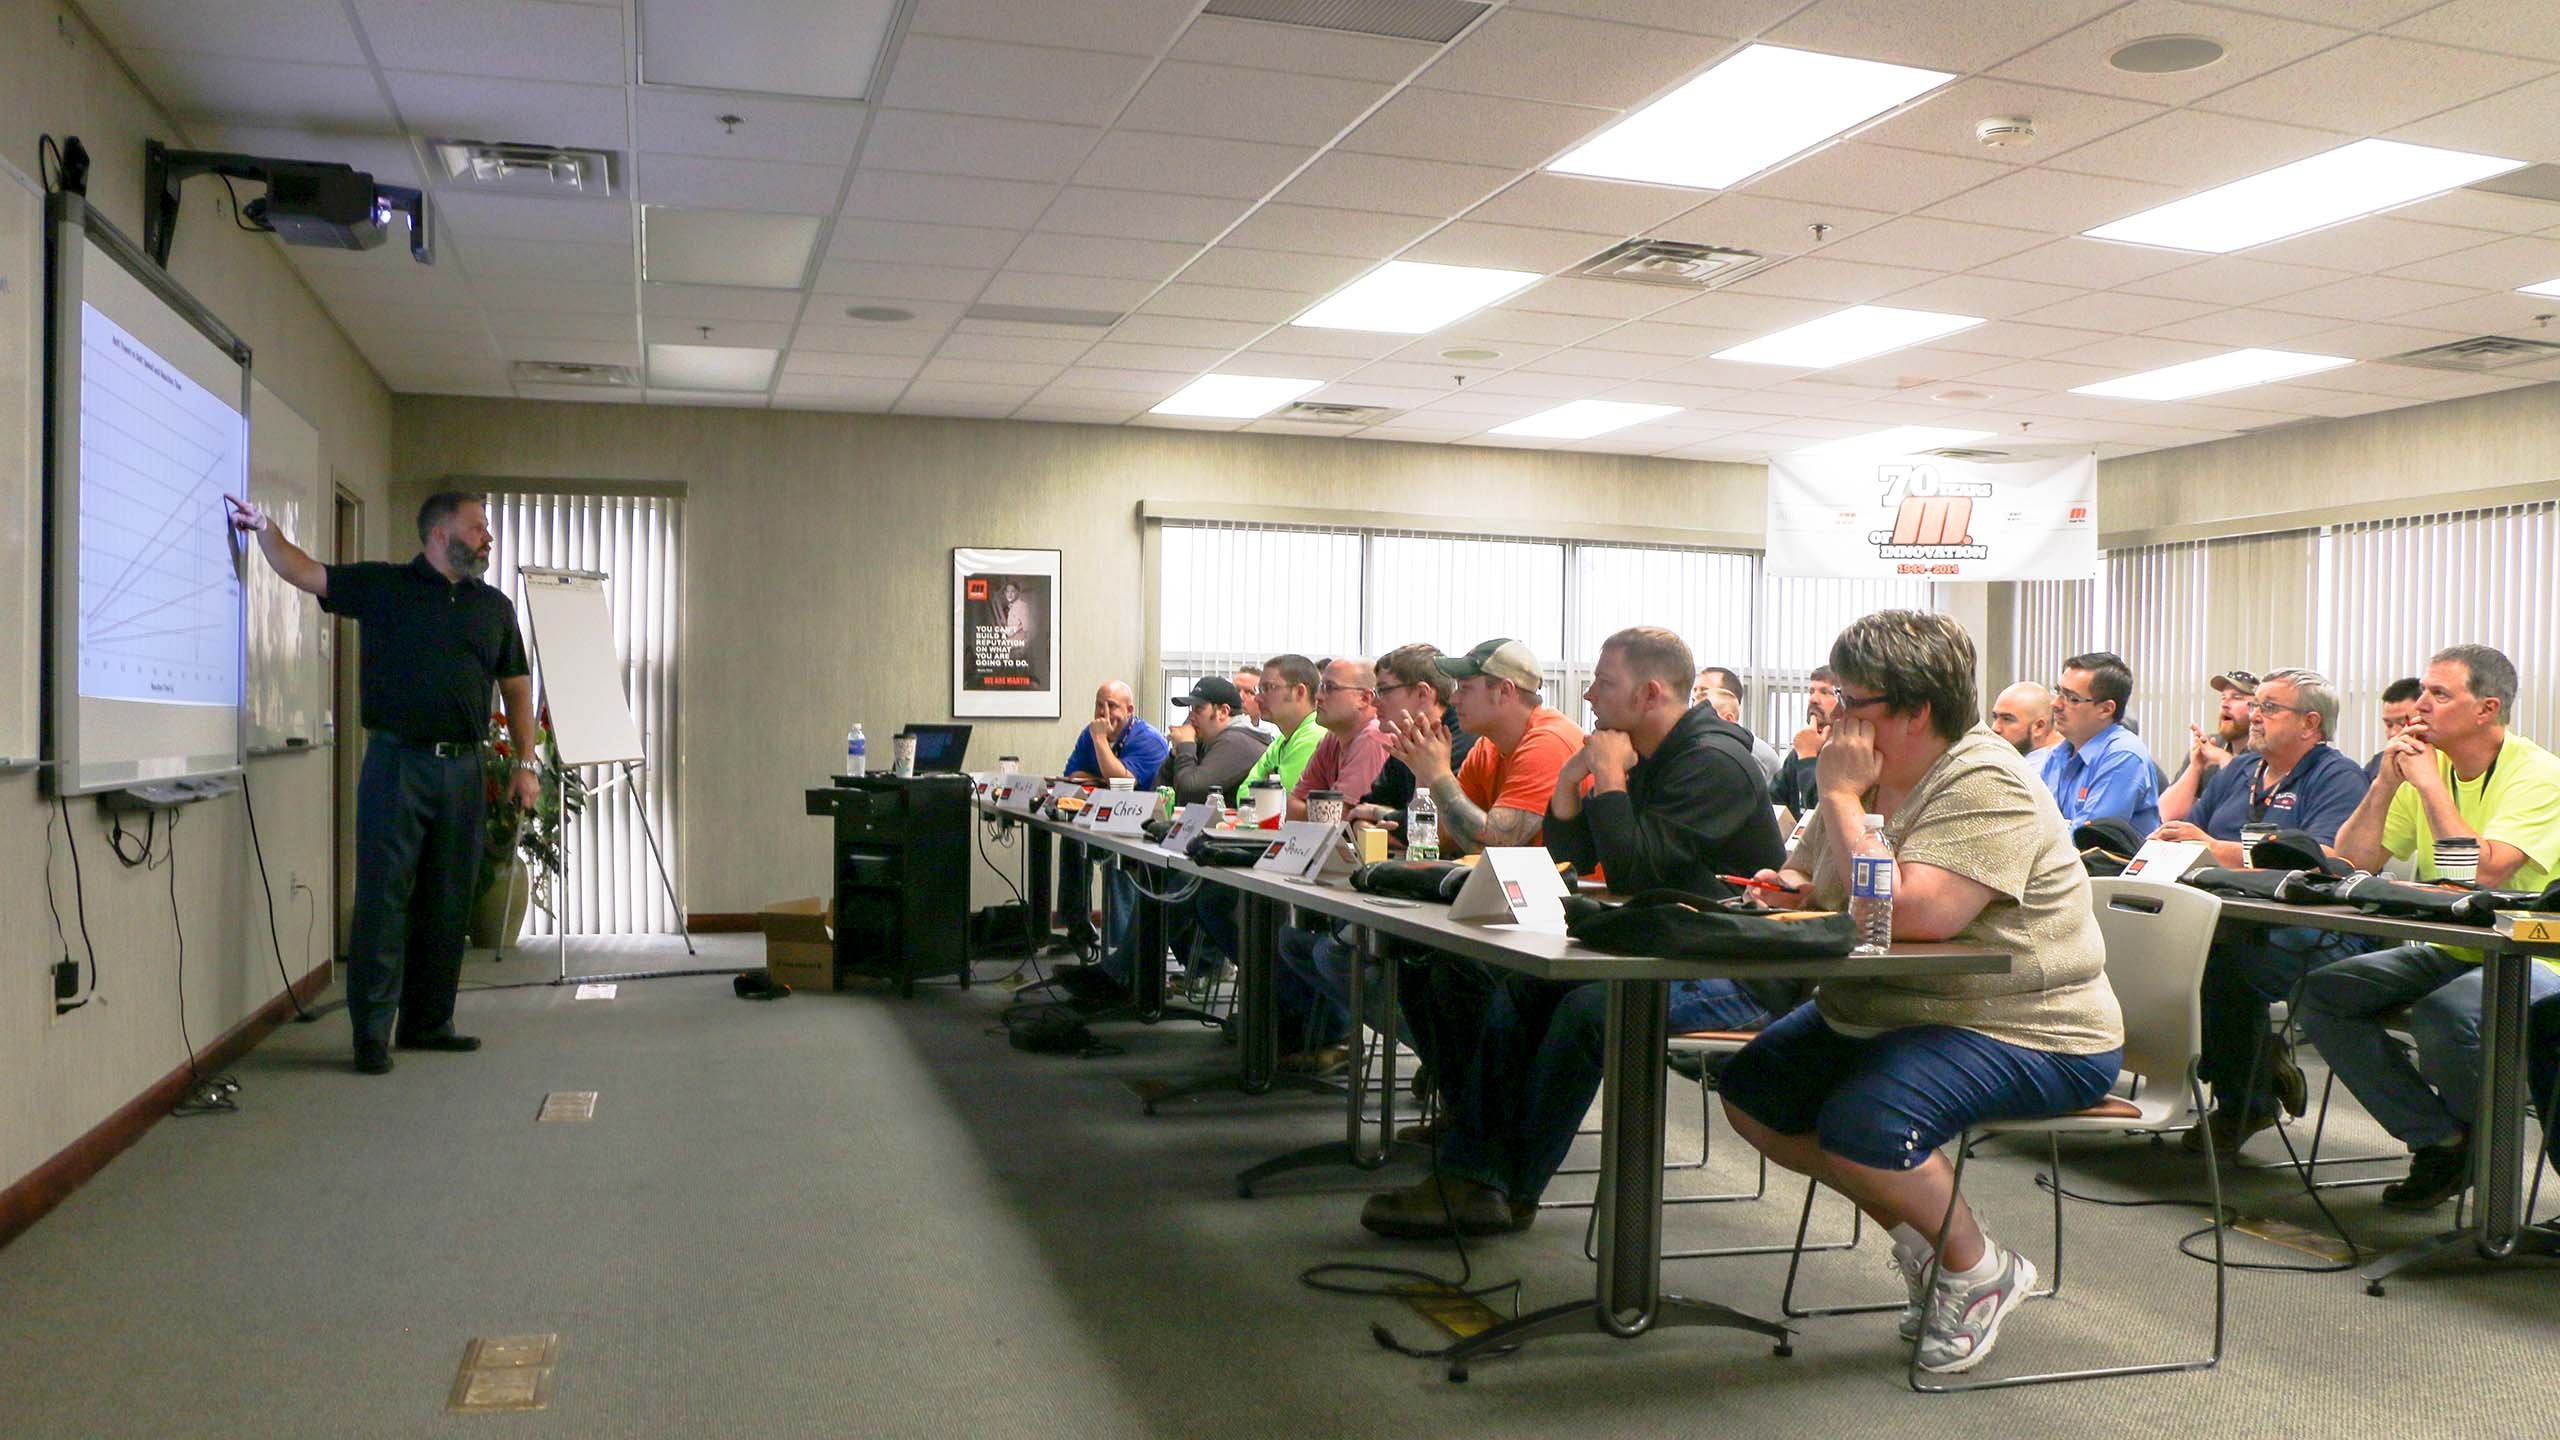 Foundations conveyor training instructor presenting to a class.